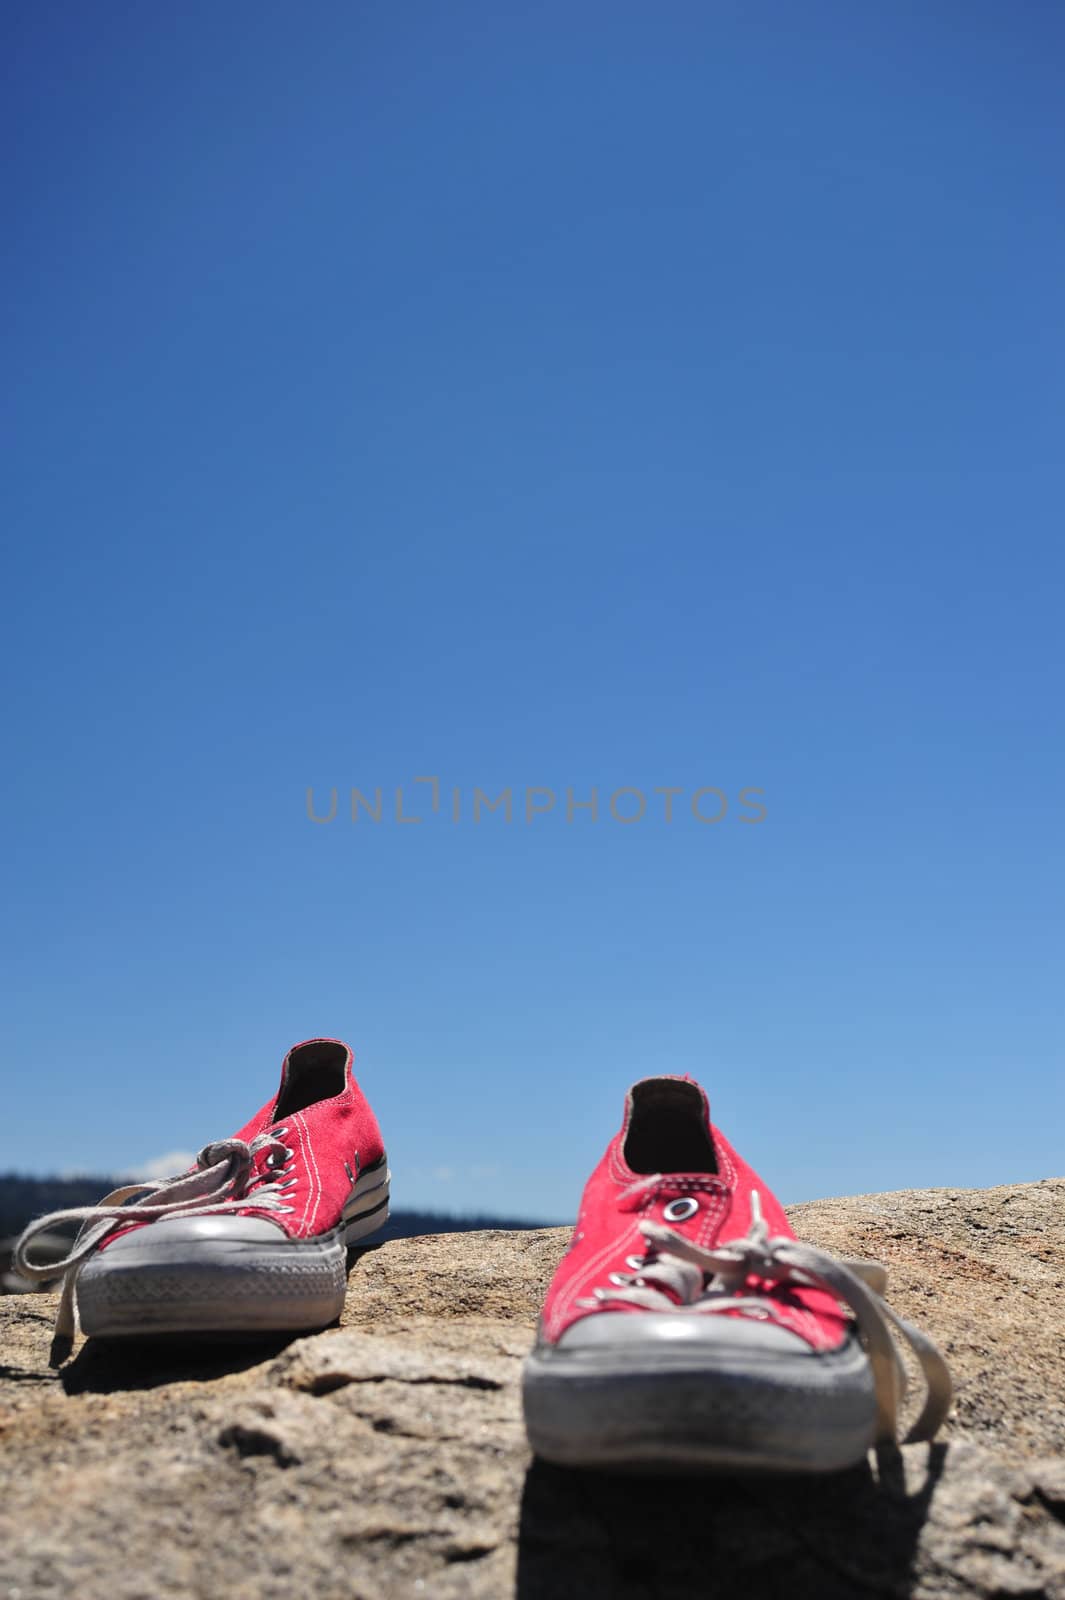 A pair of red tennis shoes by them selves on granite with a bright blue sky in the background.